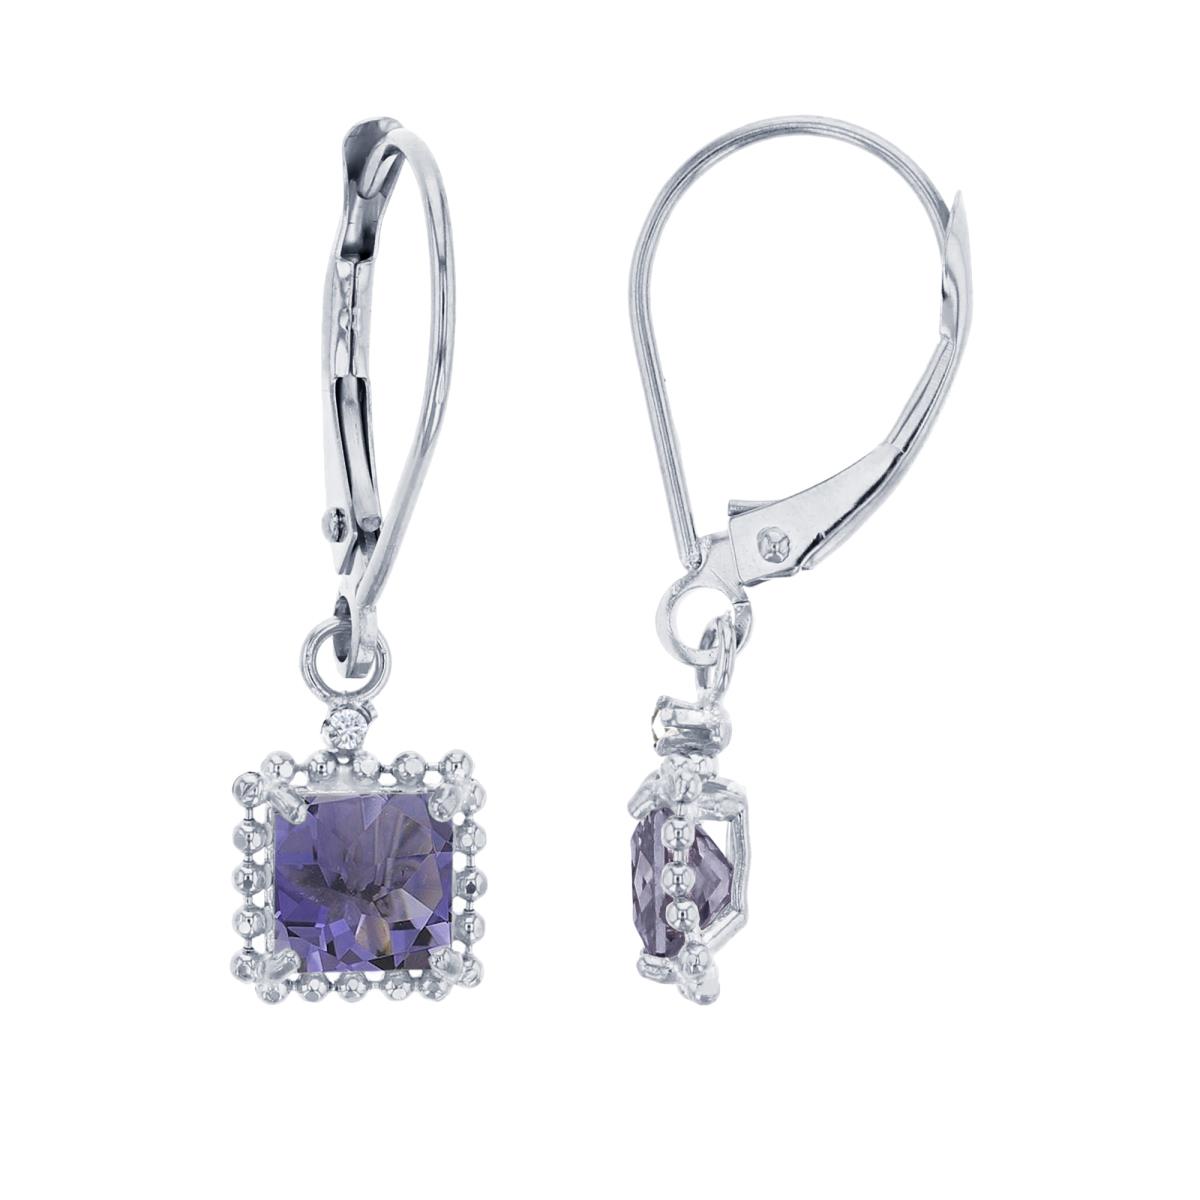 14K White Gold 1.25mm Rd Created White Sapphire & 5mm Sq Iolite Bead Frame Drop Lever-Back Earring